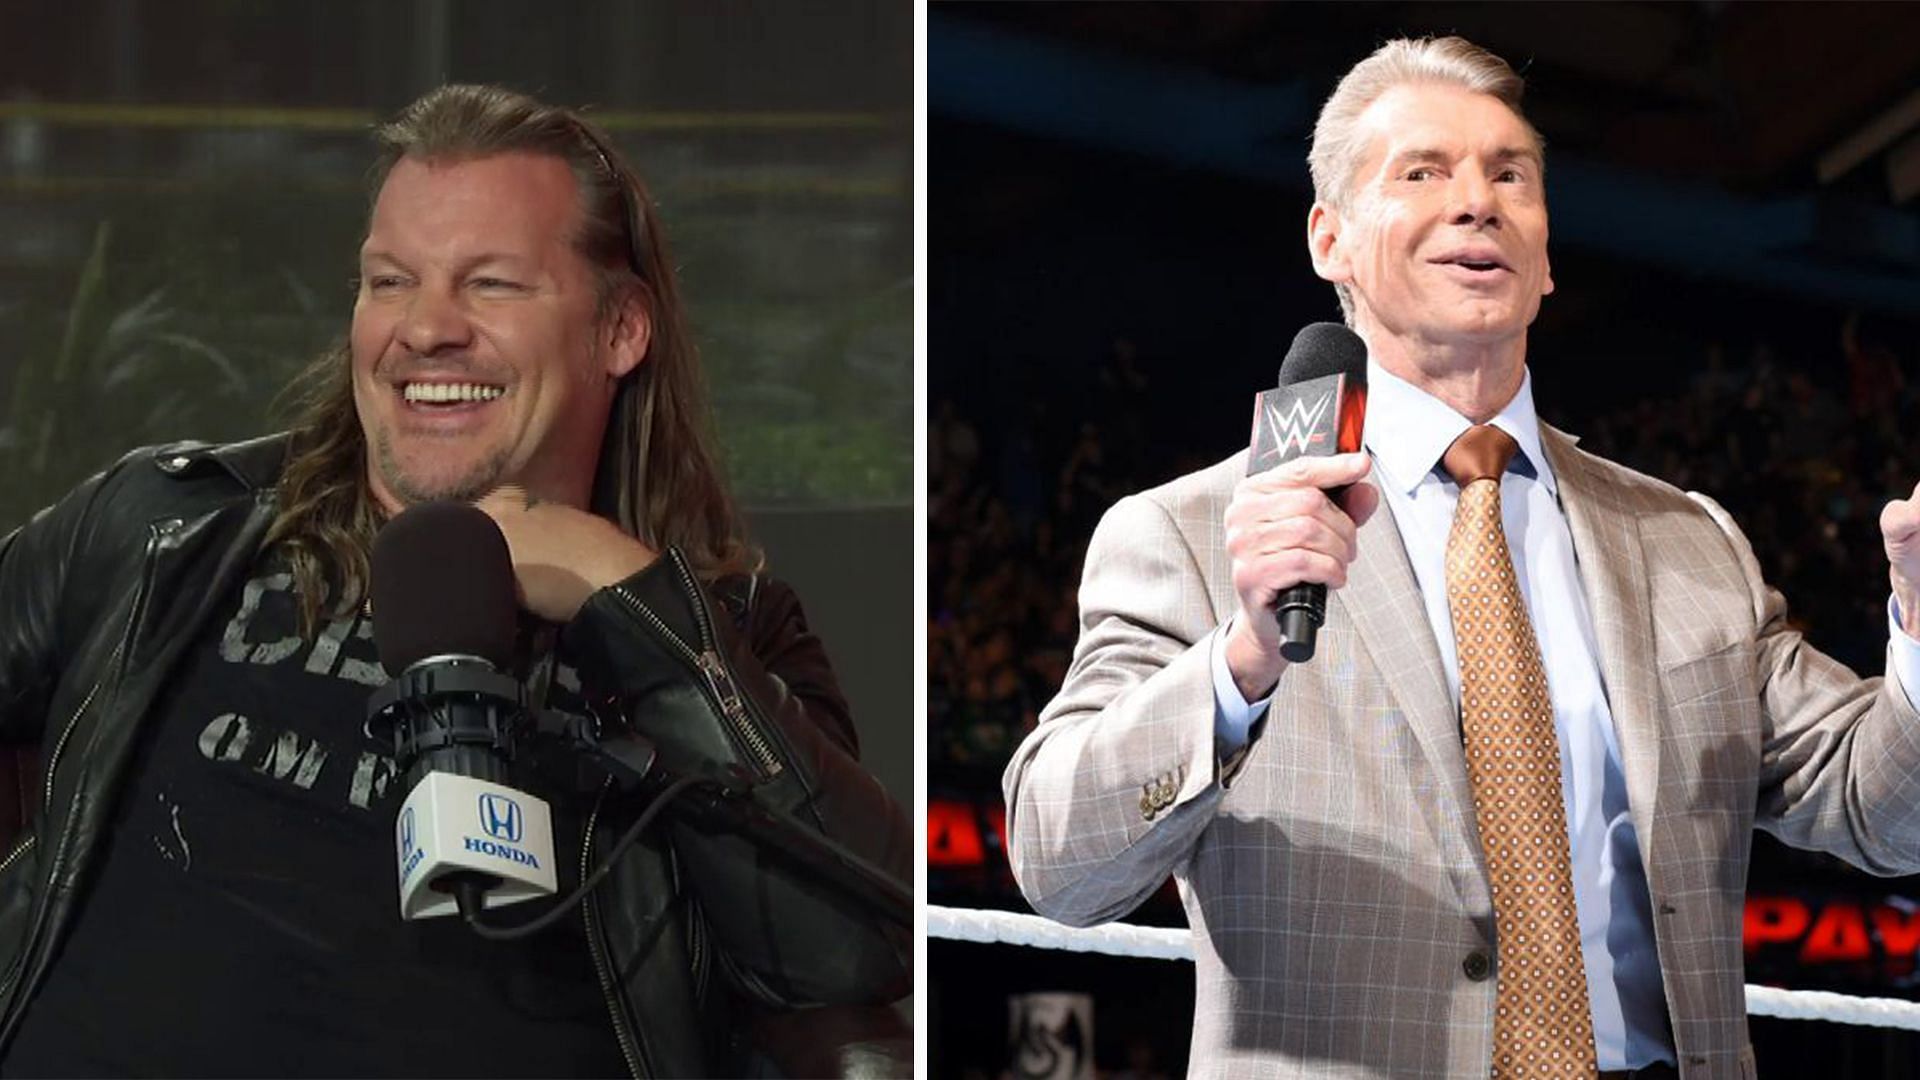 Chris Jericho enjoyed working for Vince McMahon